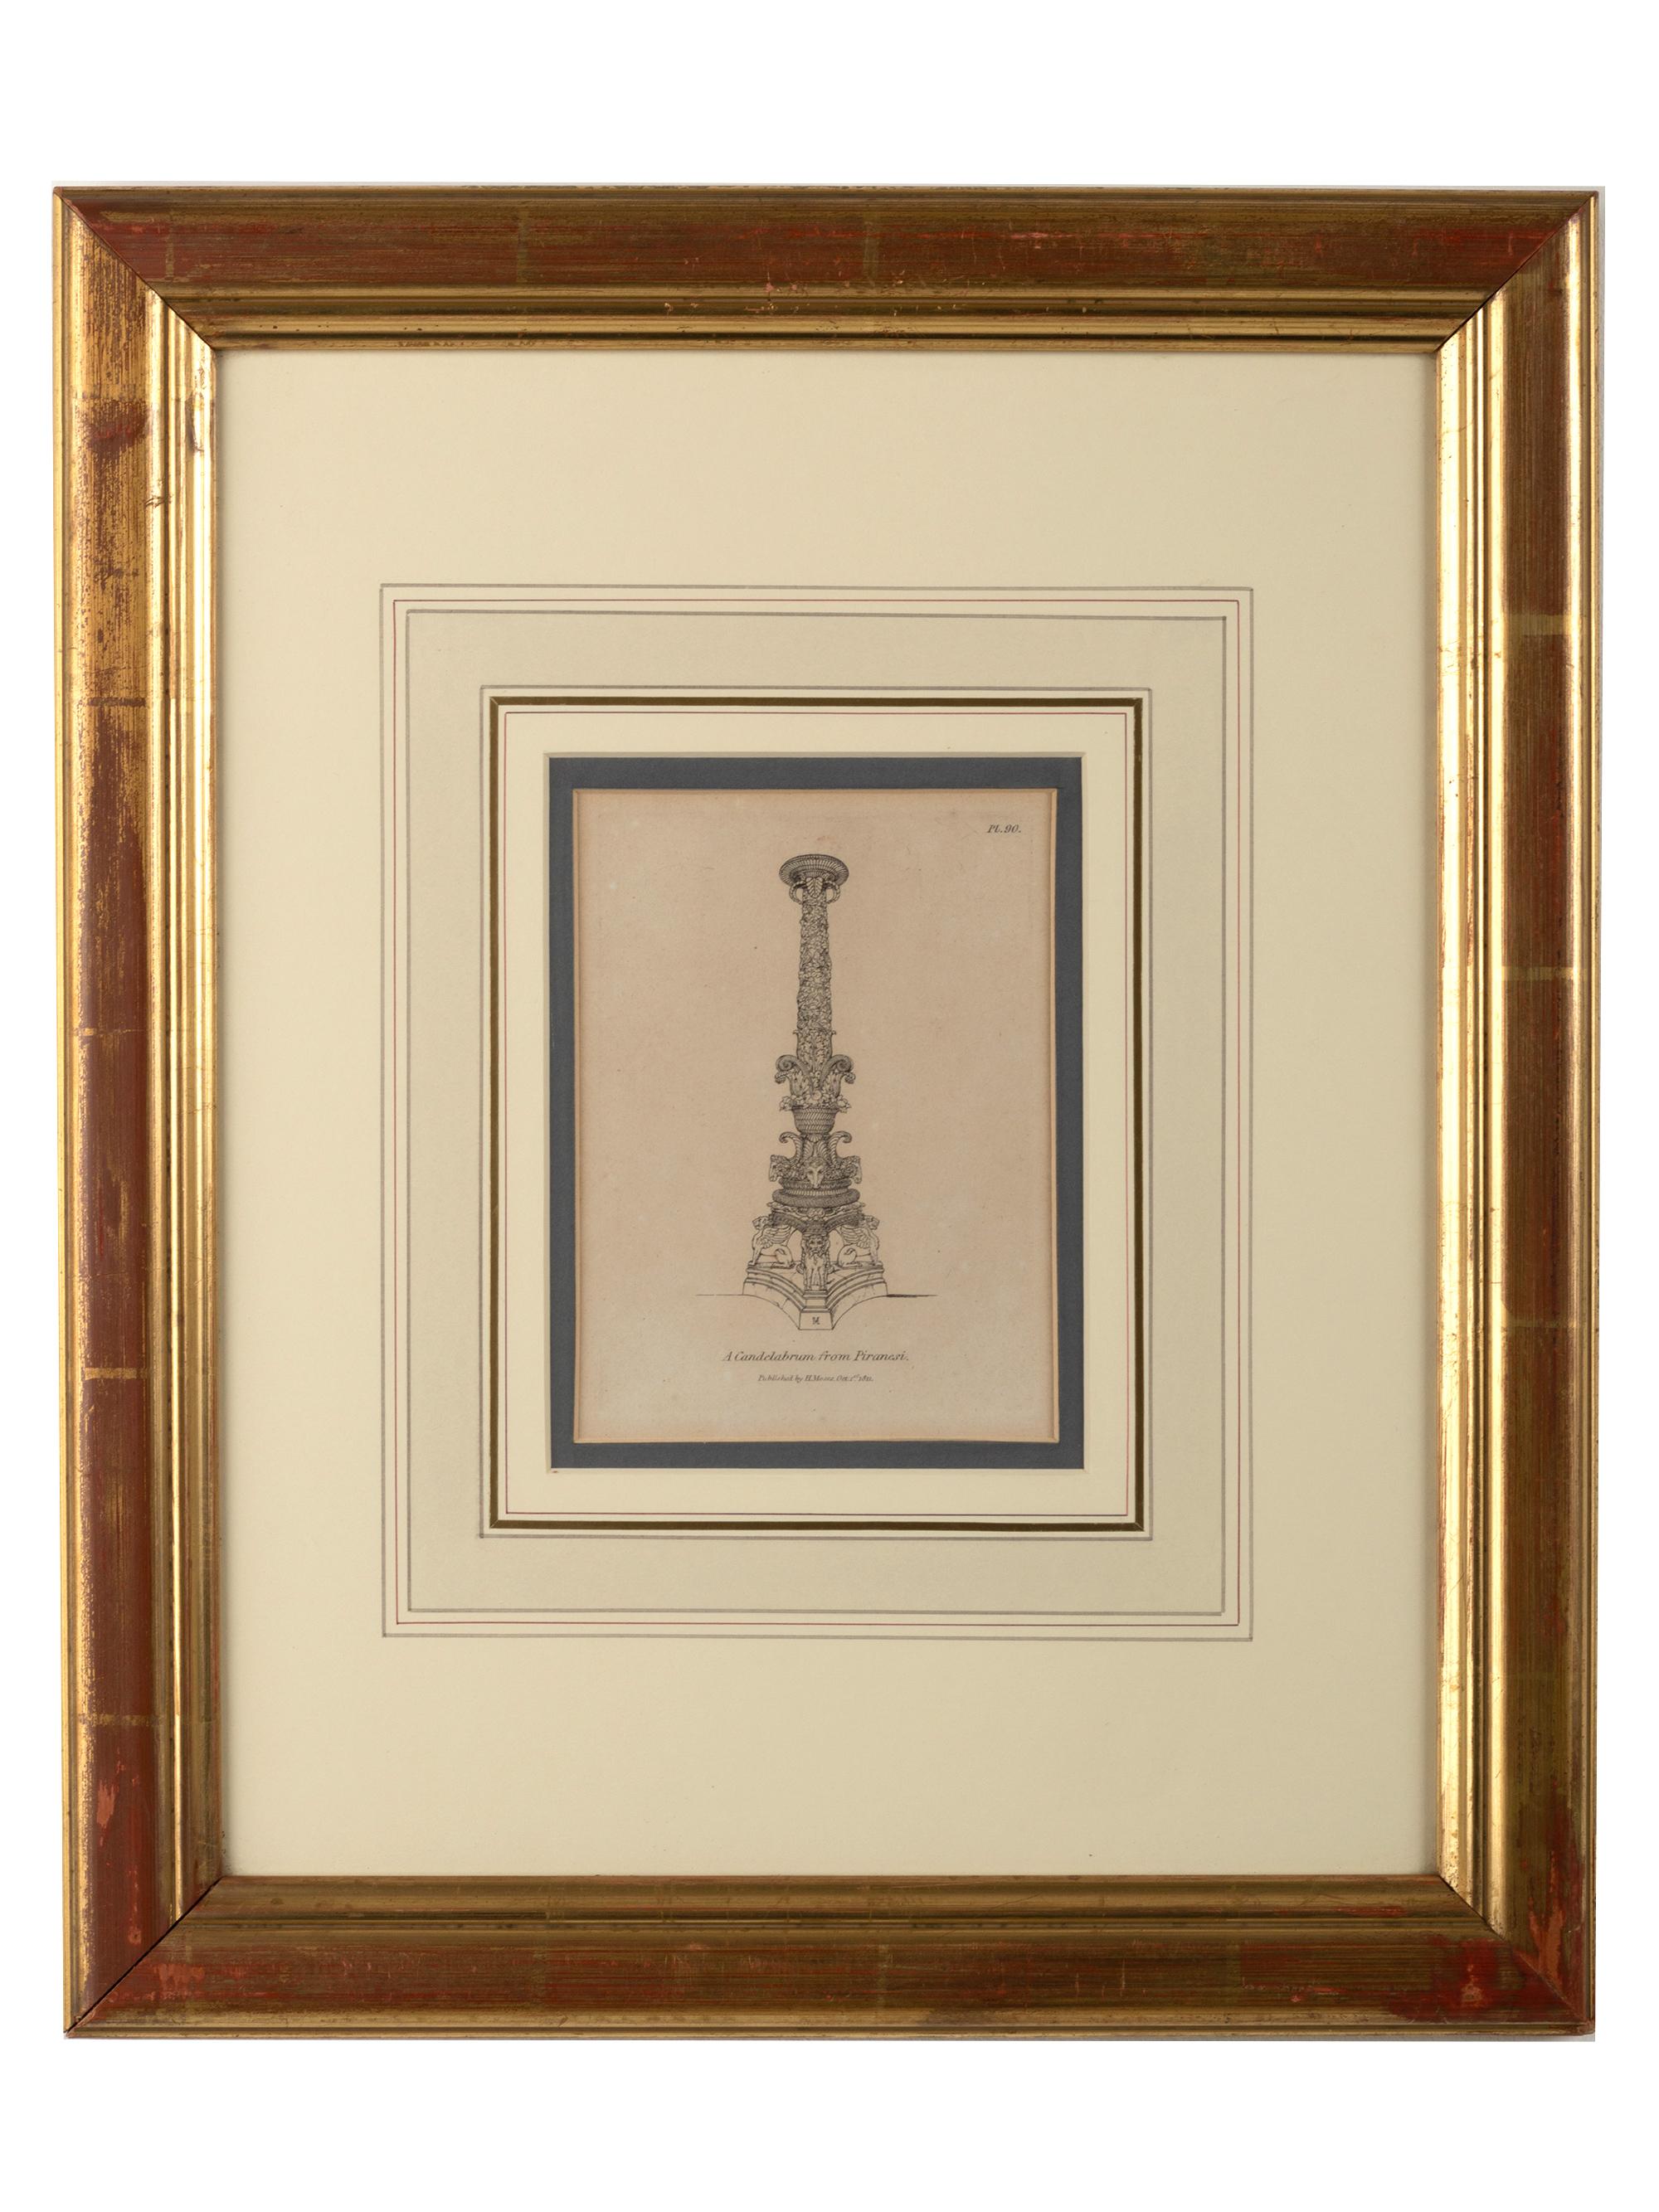 A collection of six framed antique 19th century Henry Moses fine engravings.

Depicting collections of antique vases, tripods candelabras etc.
Copper plate engraving published, by Henry Moses, London, circa 1811.

Henry Moses (1782-1870)
One